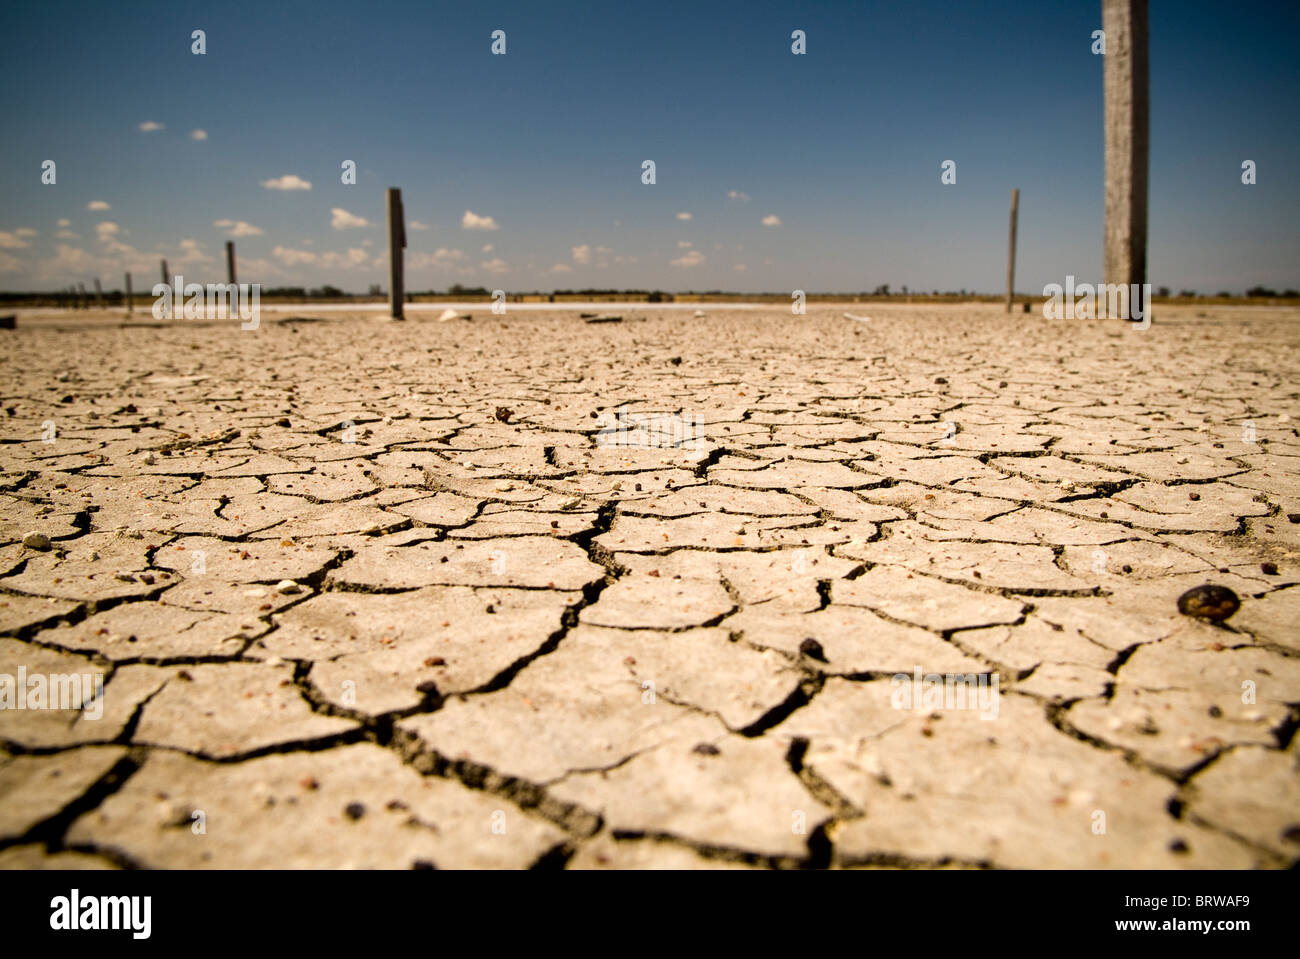 Badly cracked earth under a scorching sun Stock Photo